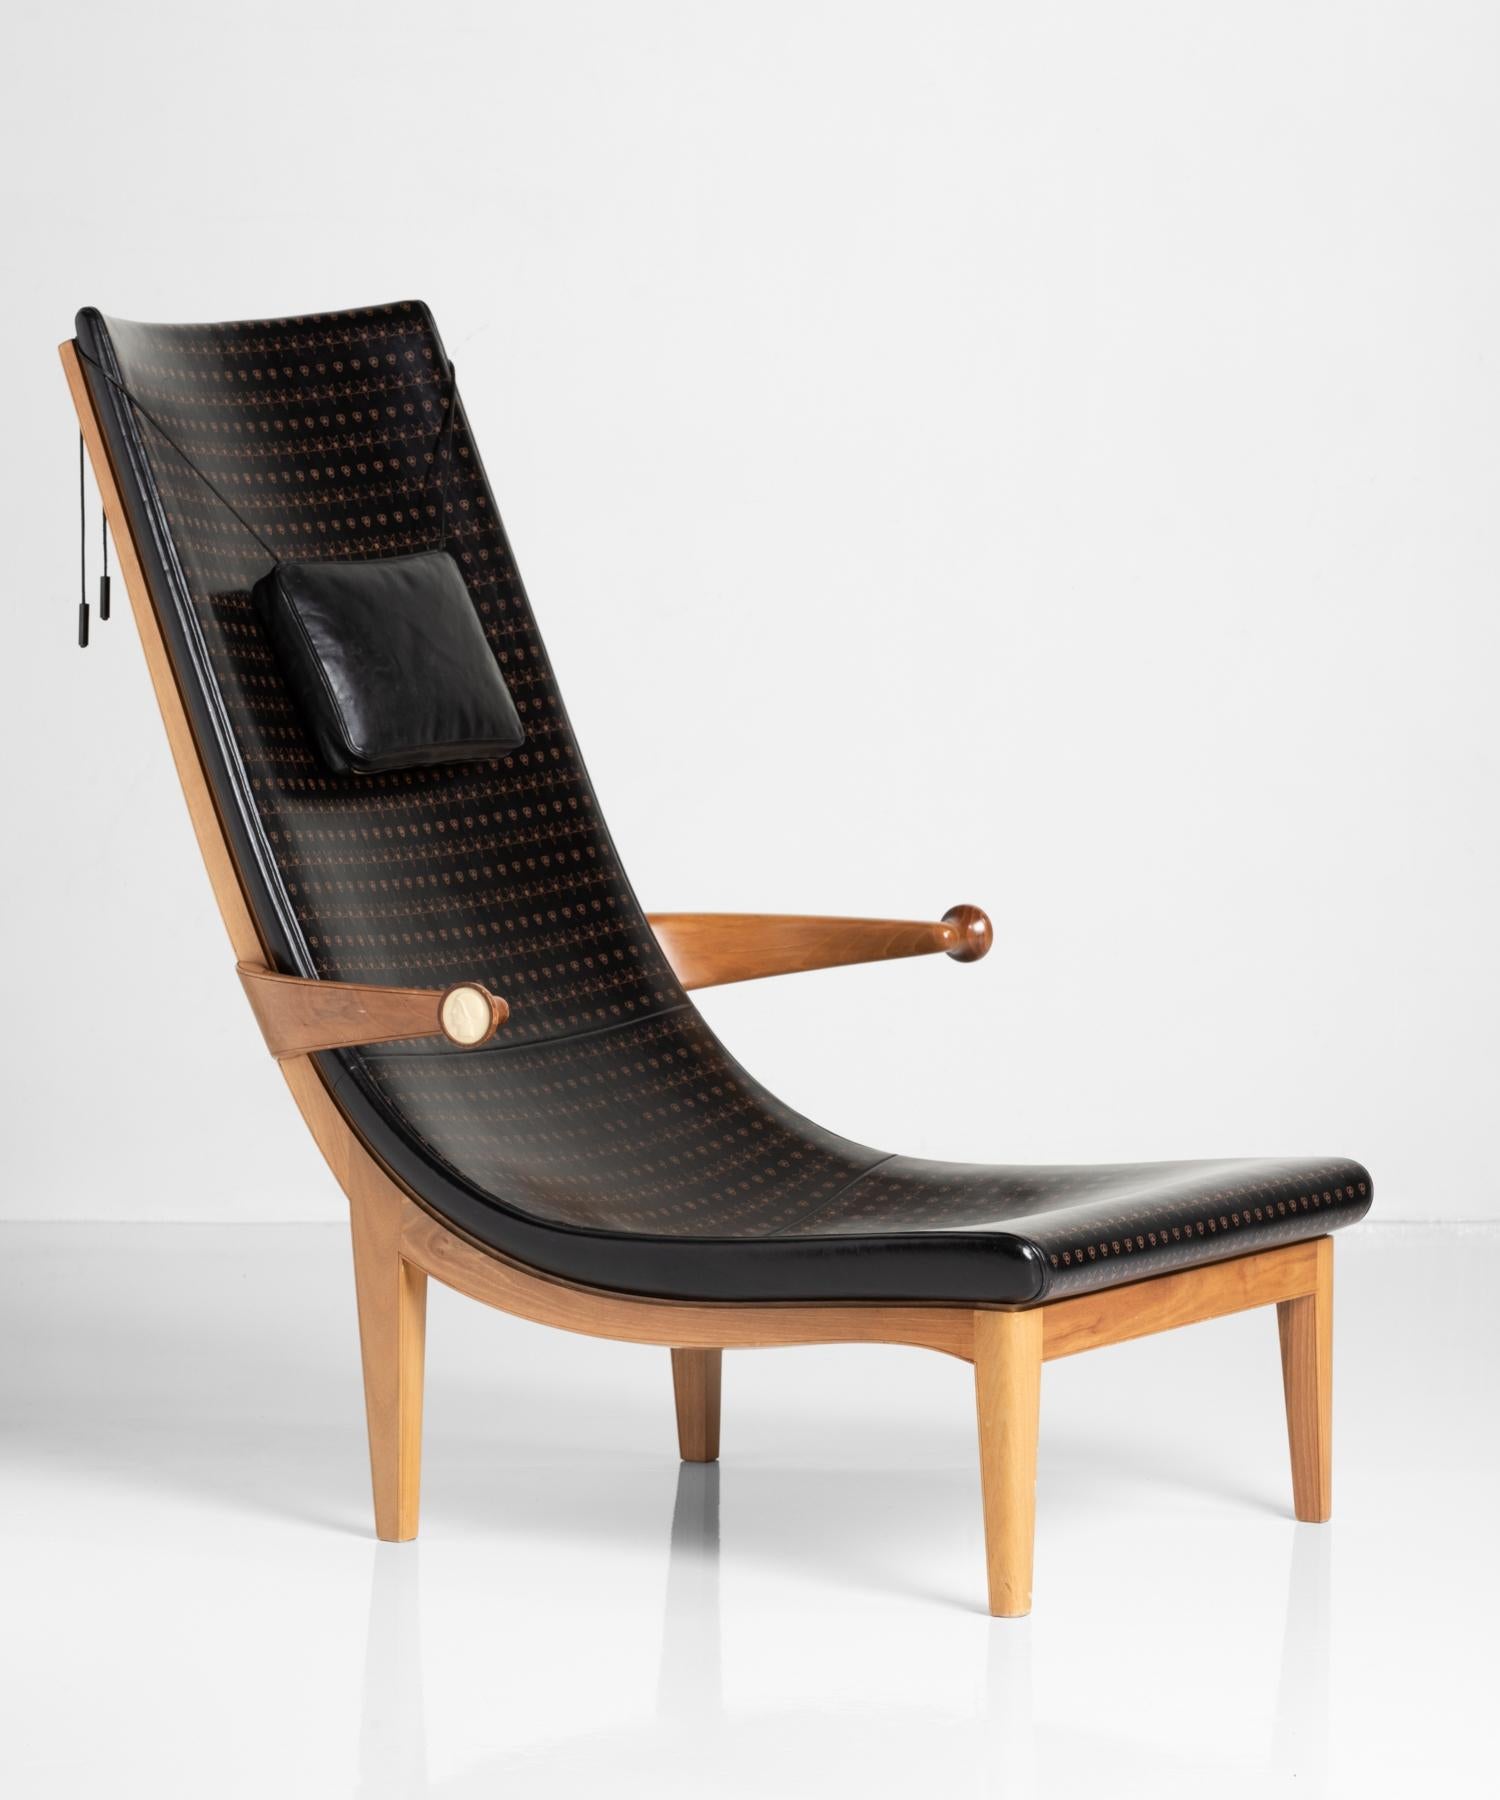 Senna chair by Erik Gunnar Asplund, Italy, circa 1980

Designed in 1925 for the Swedish Pavilion at the International Exhibition of Decorative Arts in Paris, and reissued in 1980 by Cassina.